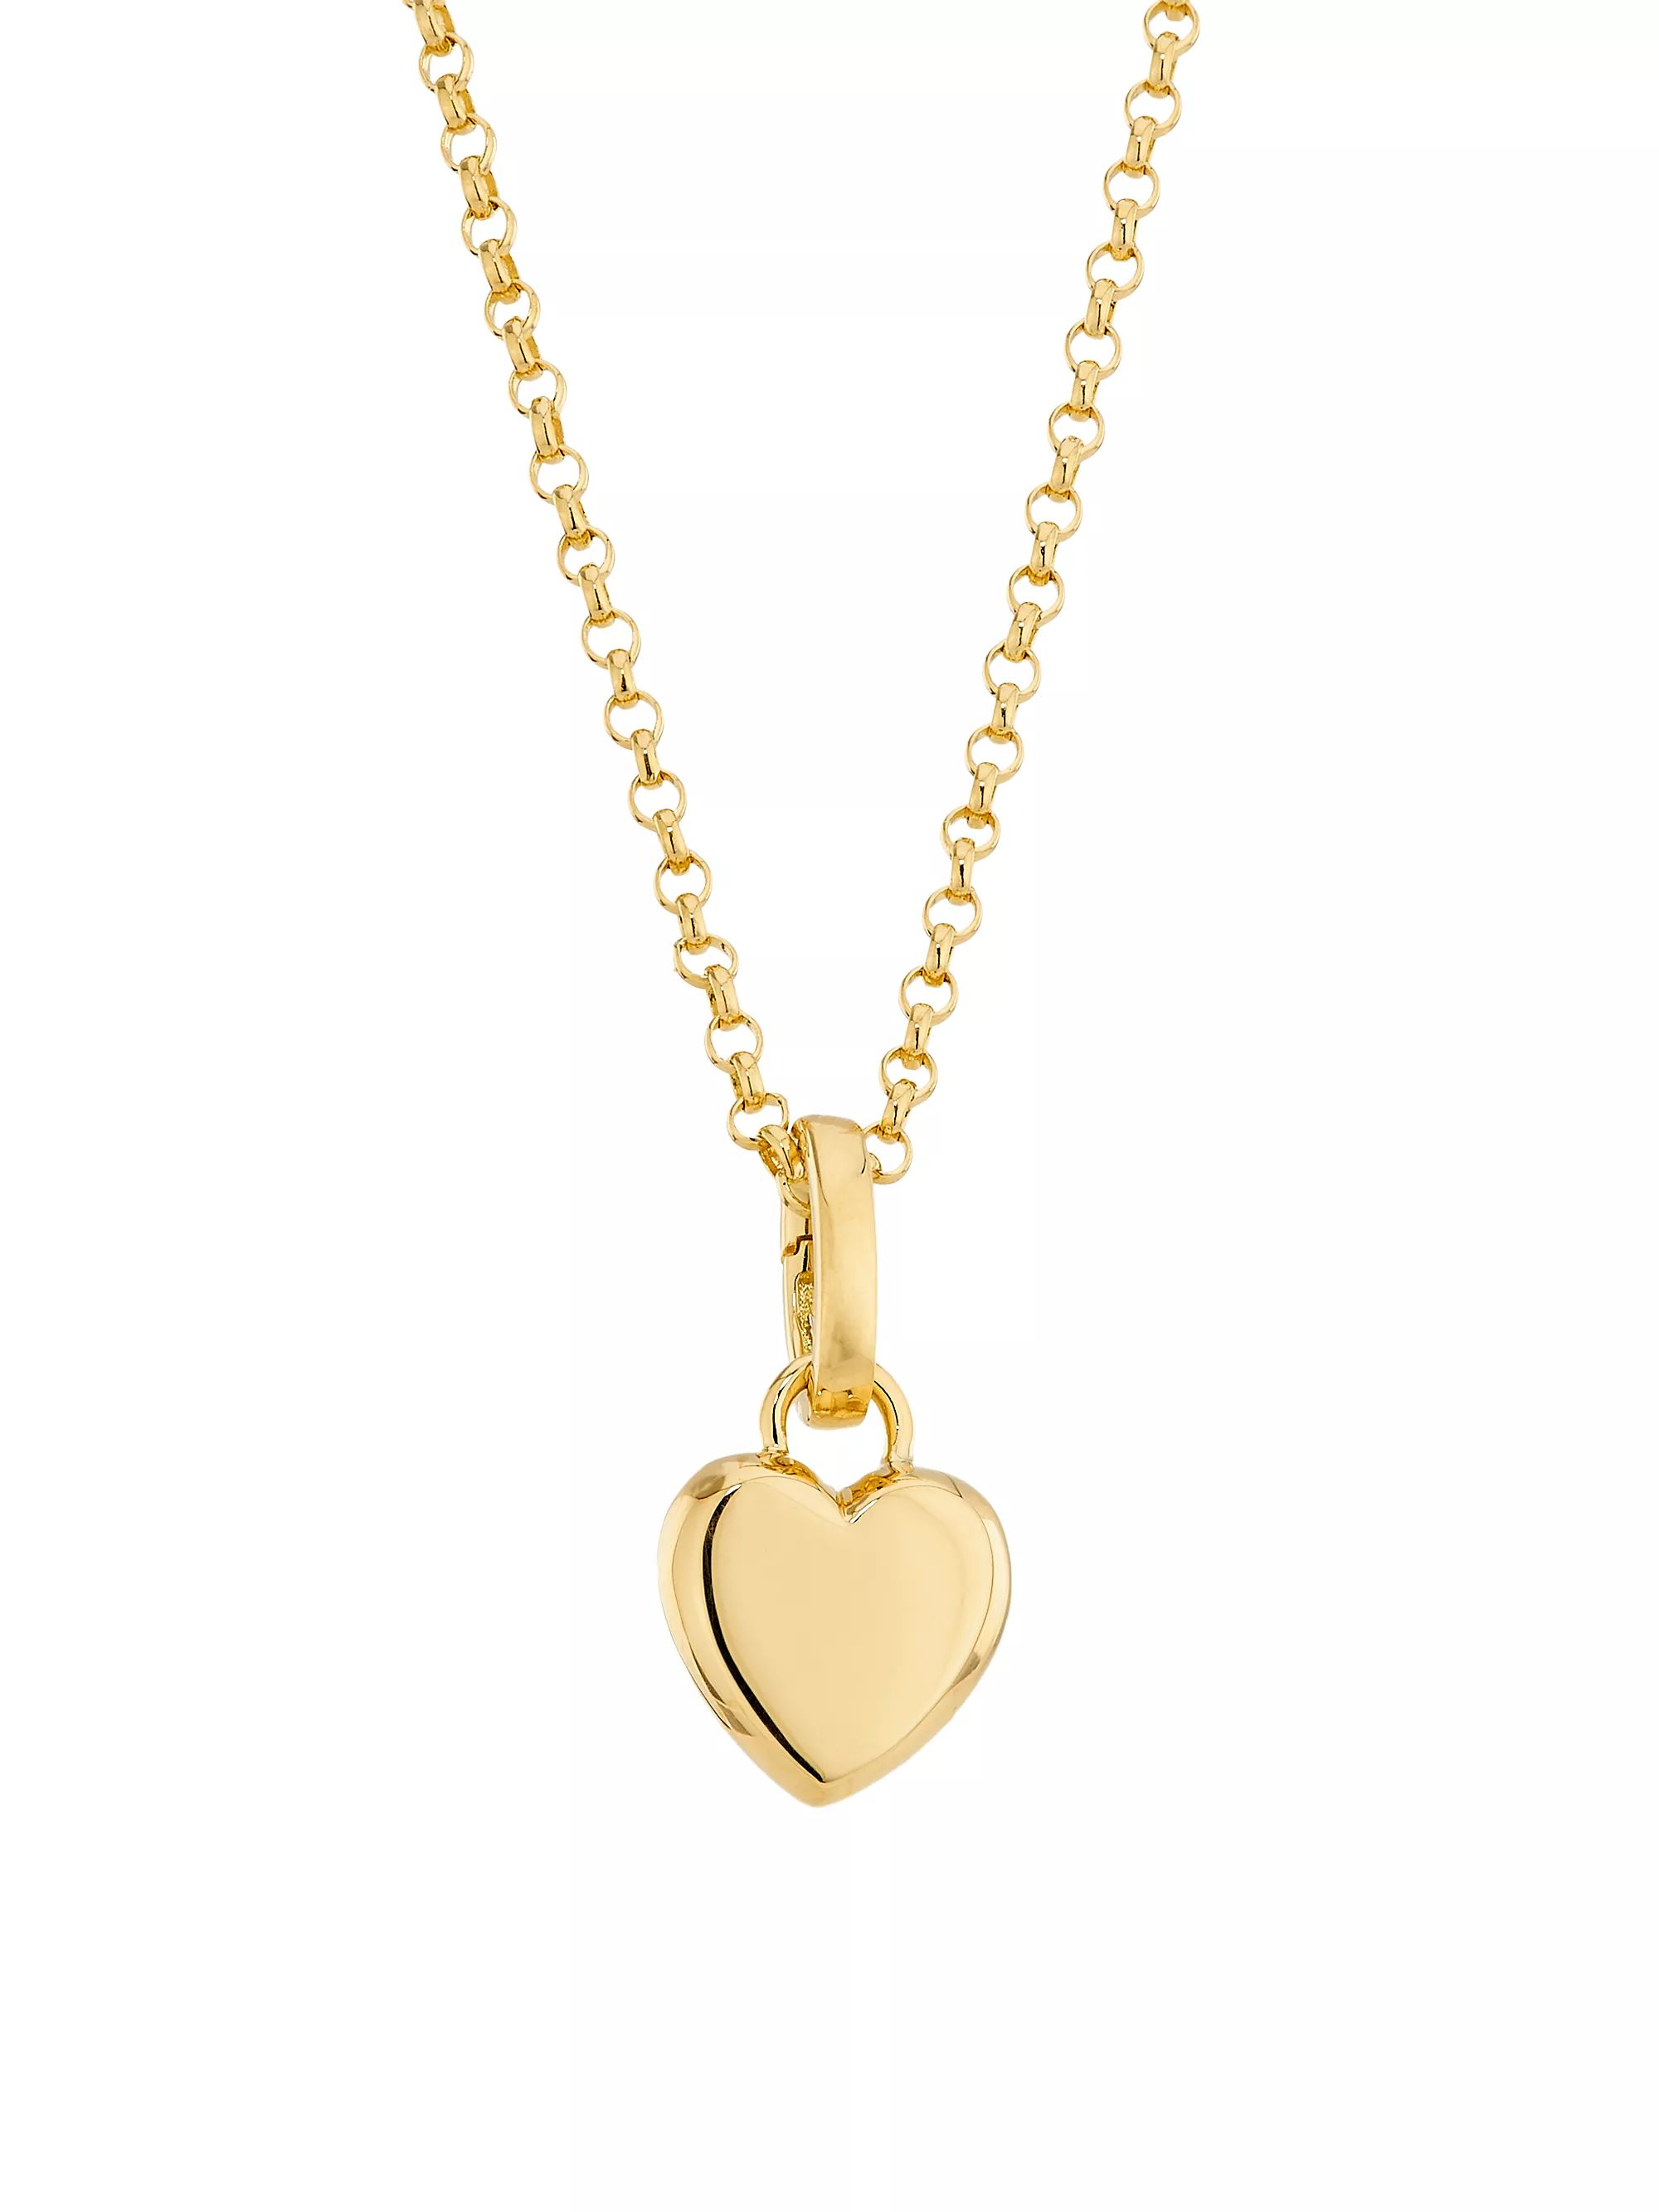 18K Yellow Gold Heart Pendant Necklace | Saks Fifth Avenue